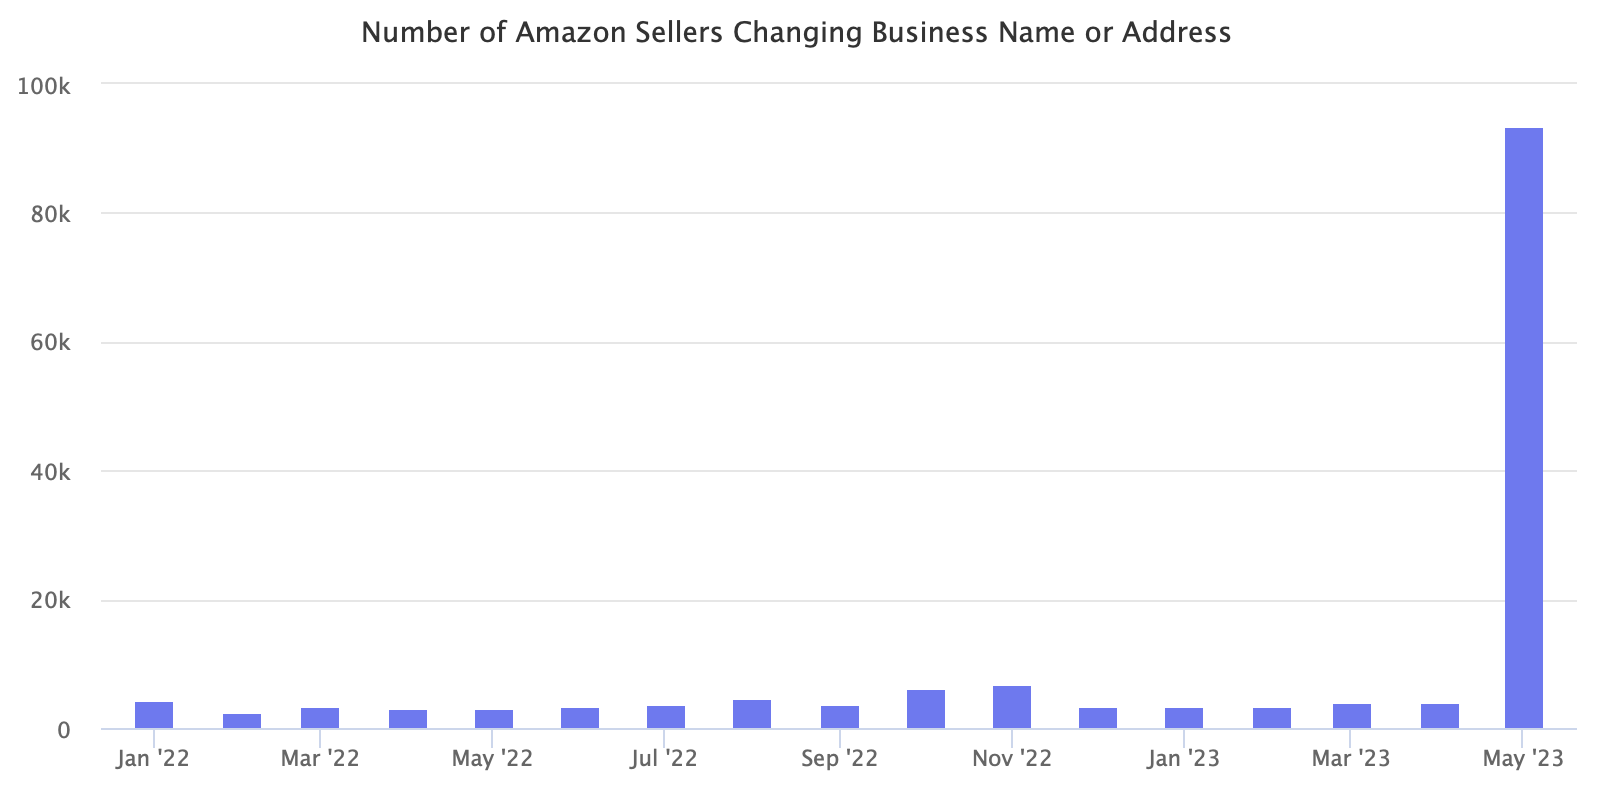 Number of Amazon Sellers Changing Business Name or Address